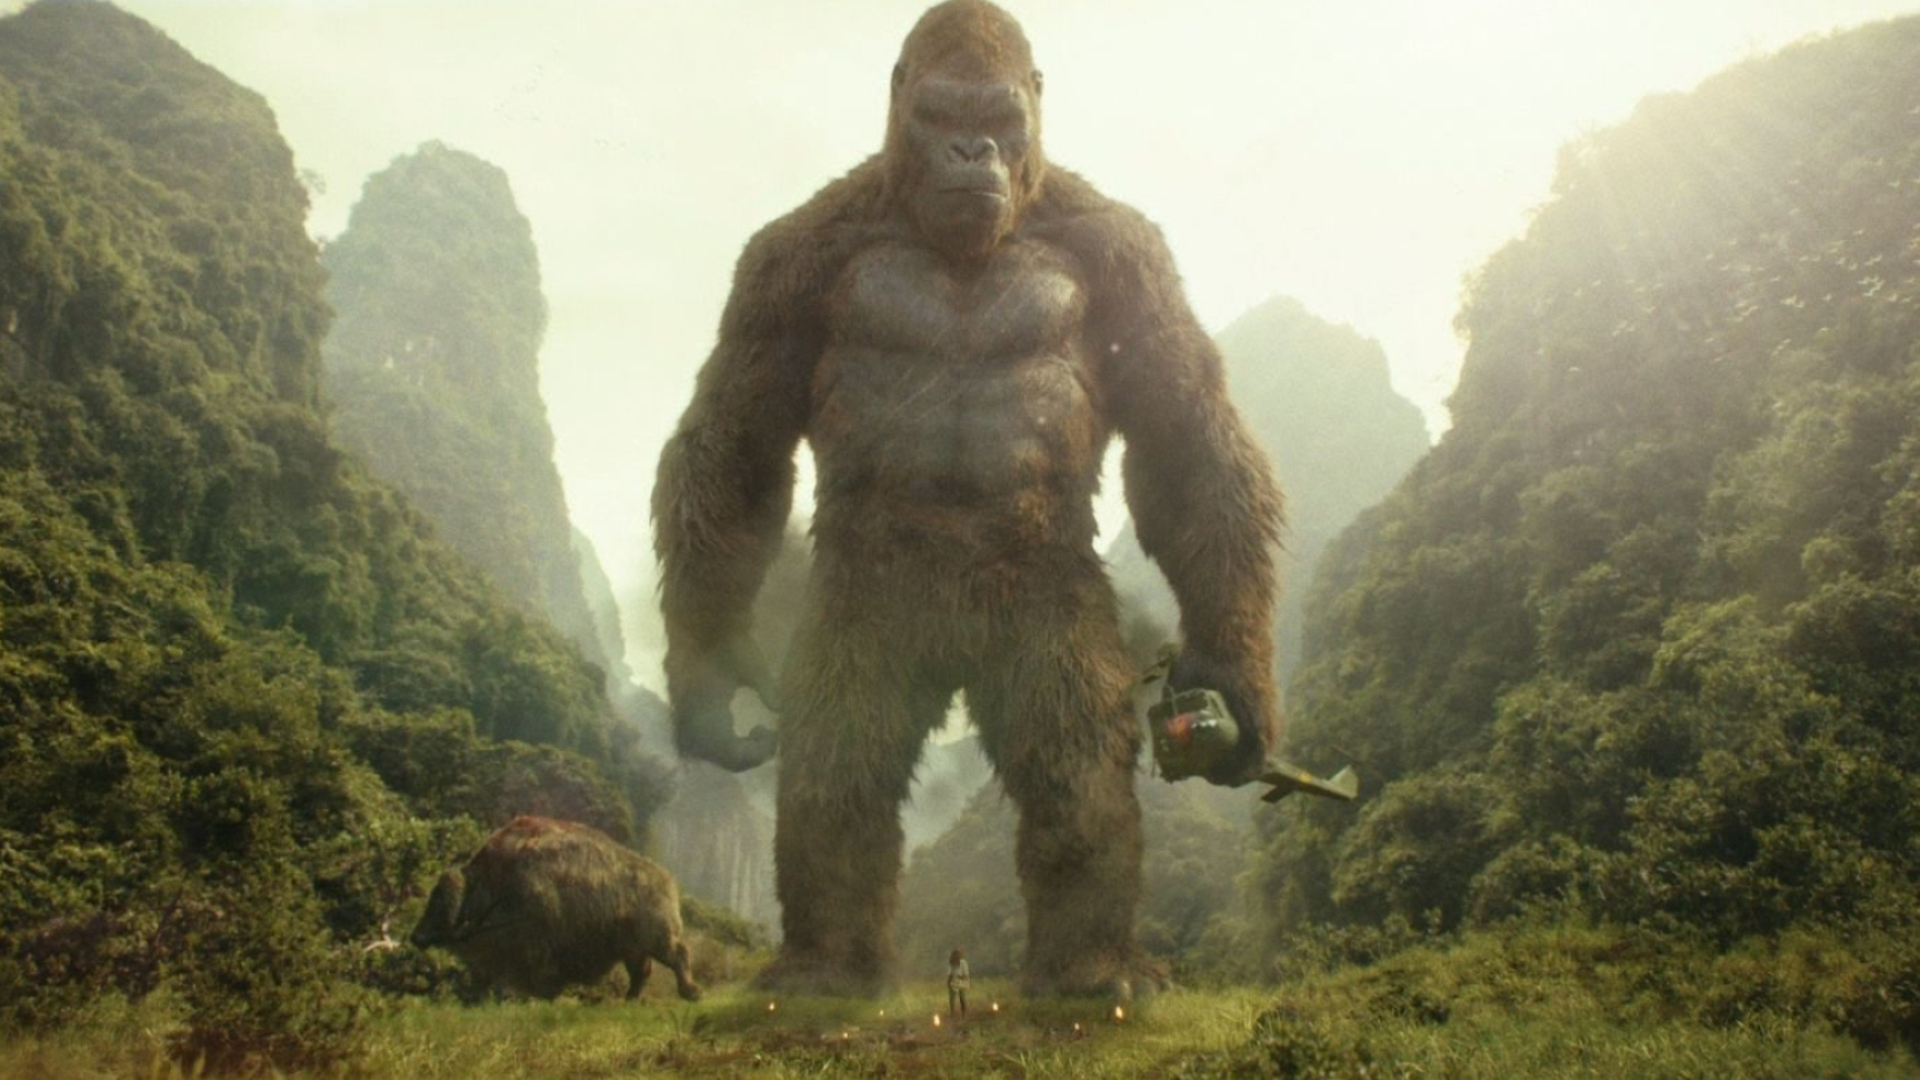 King Kong: Giant God of Skull Island, The-Mountain-Who-Thunders-Death, 2017 movie. 1920x1080 Full HD Background.